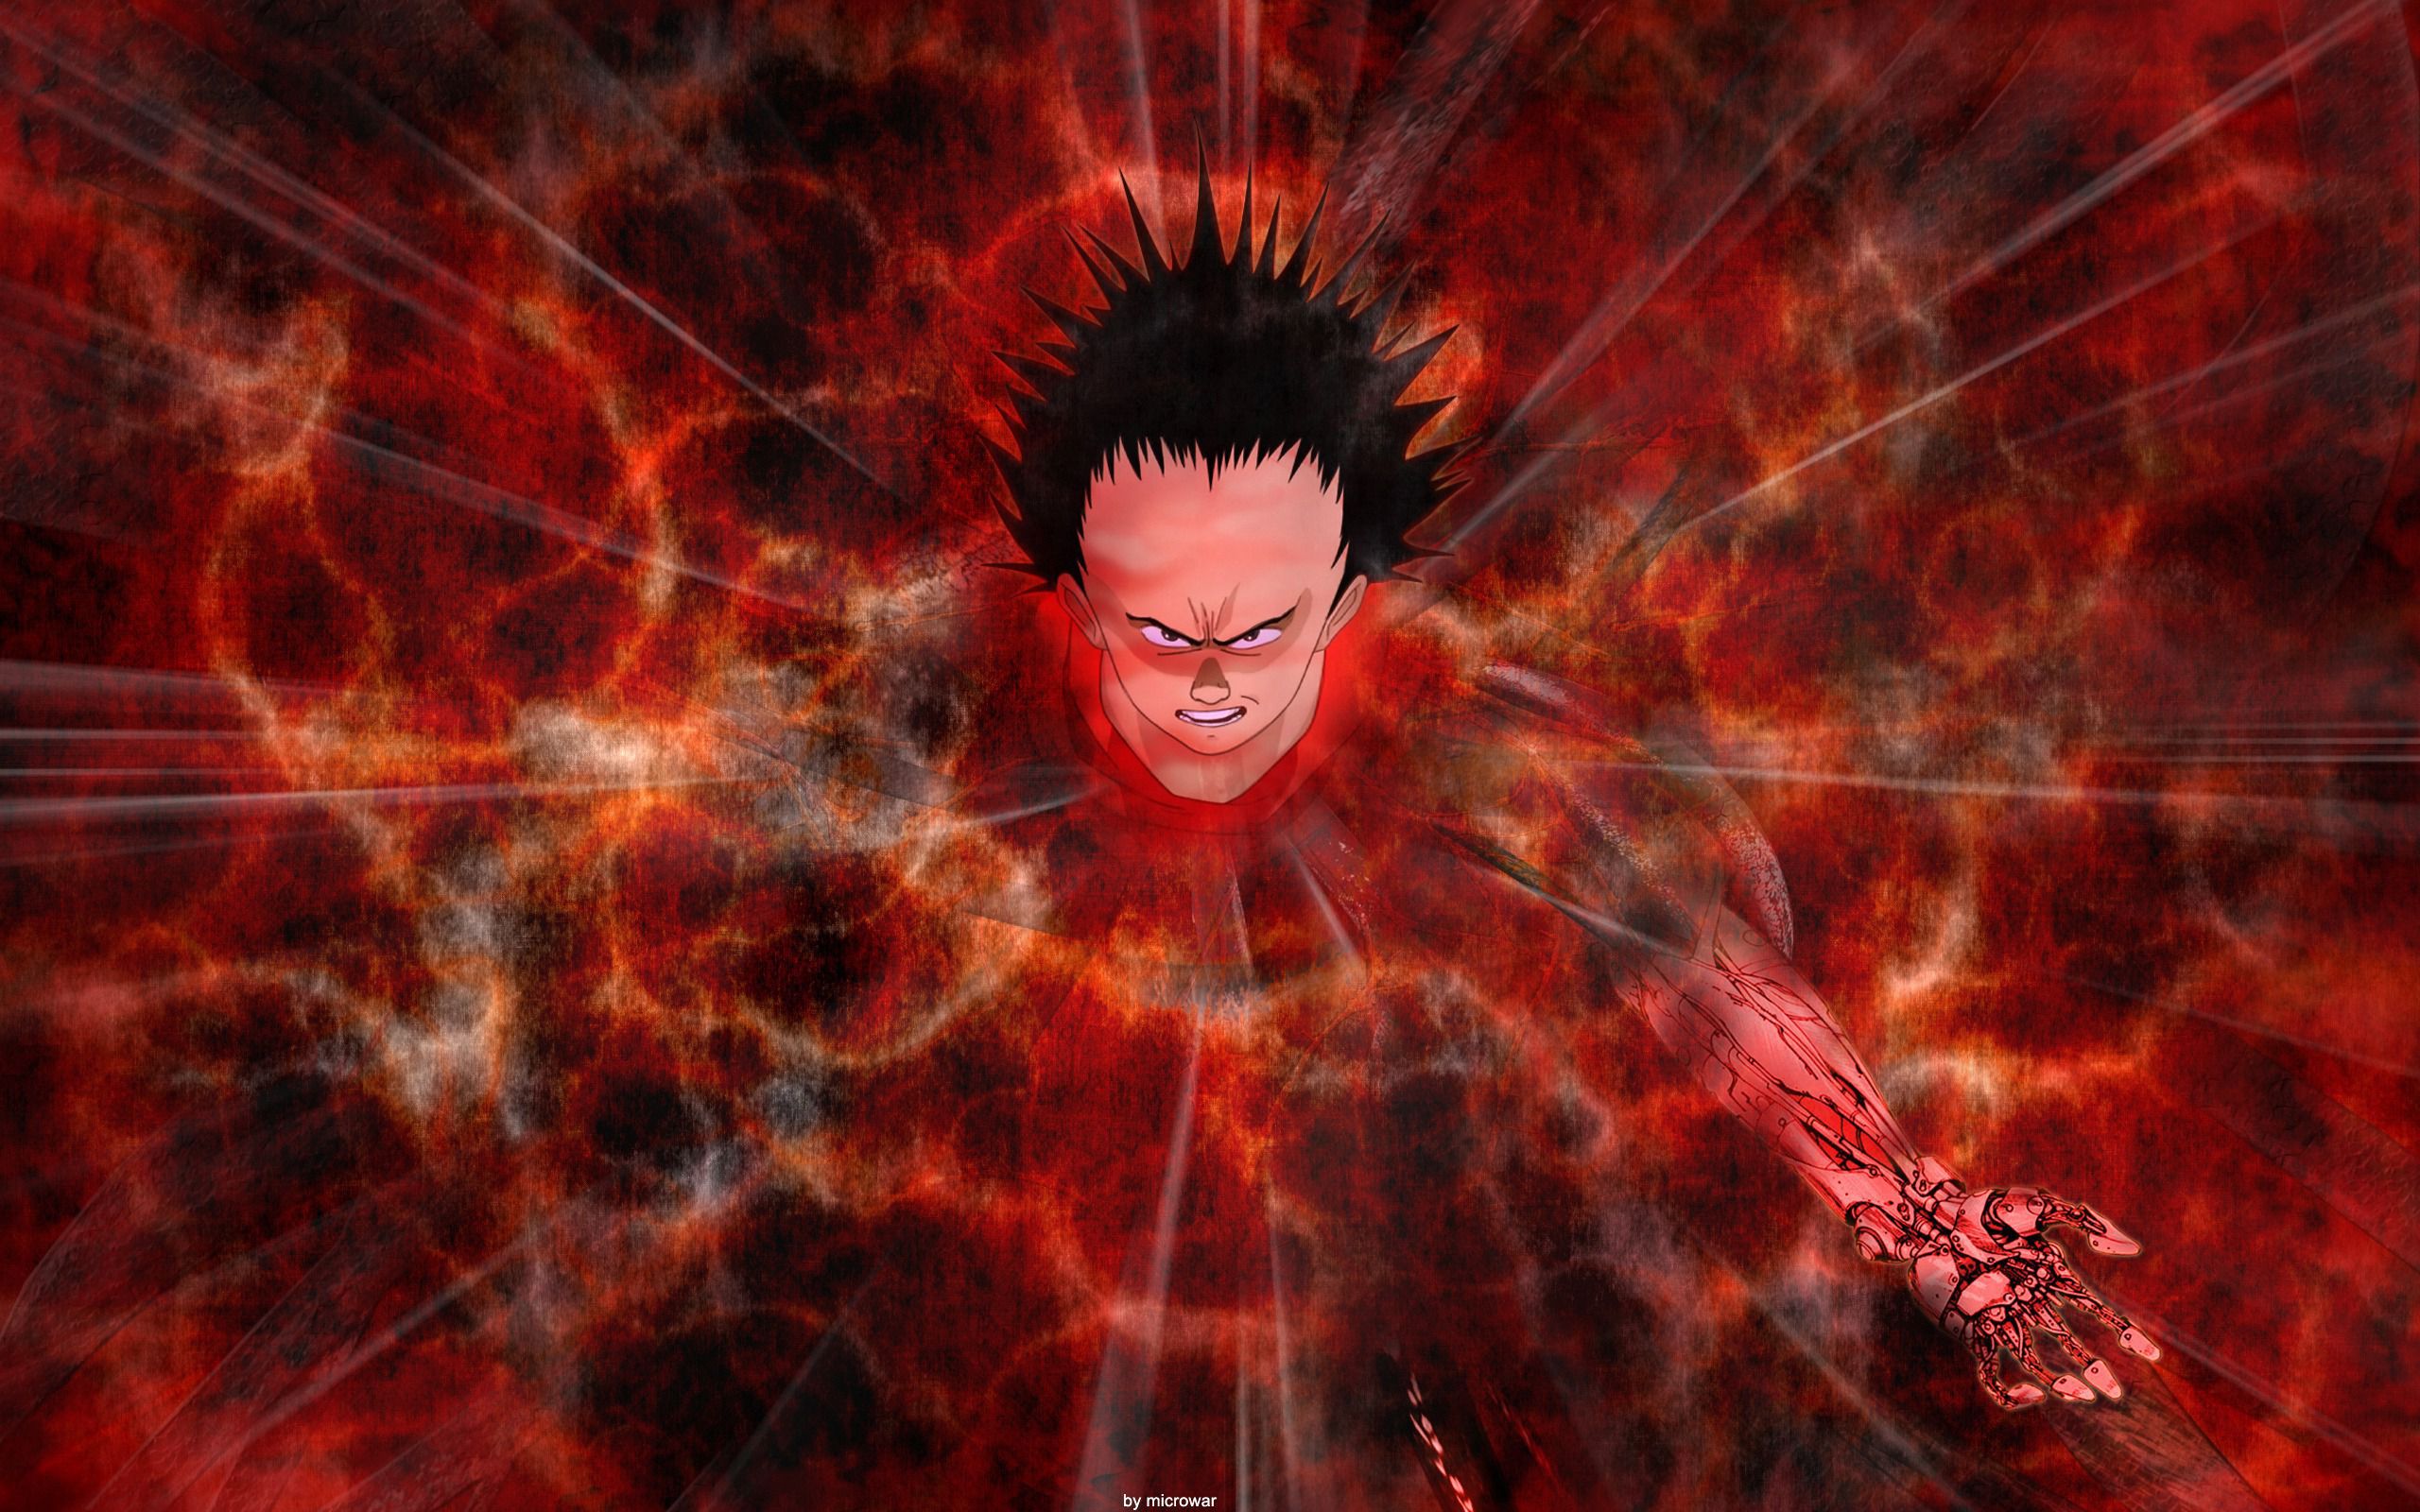 Tetsuo Shima Is a Well-Written Mentally Ill Antagonist | The Mary Sue